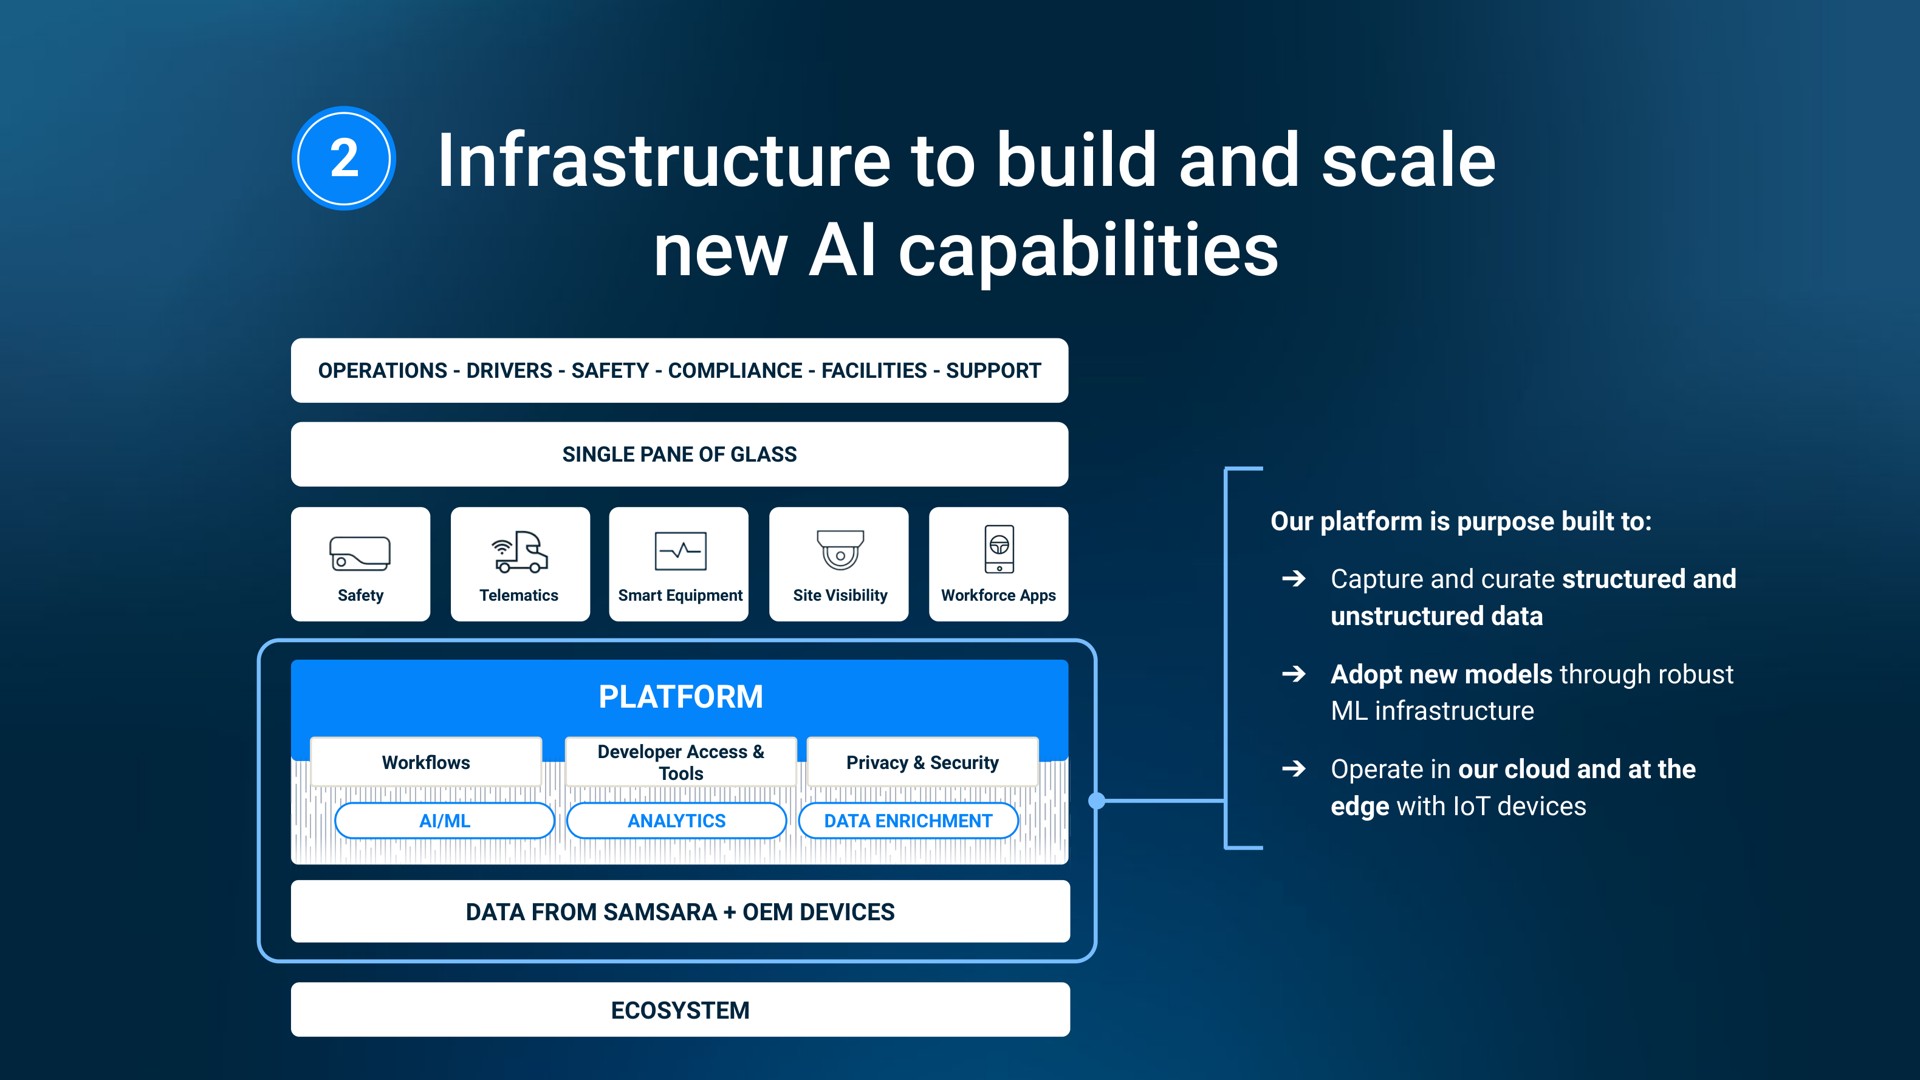 infrastructure to build and scale new capabilities a | Samsara